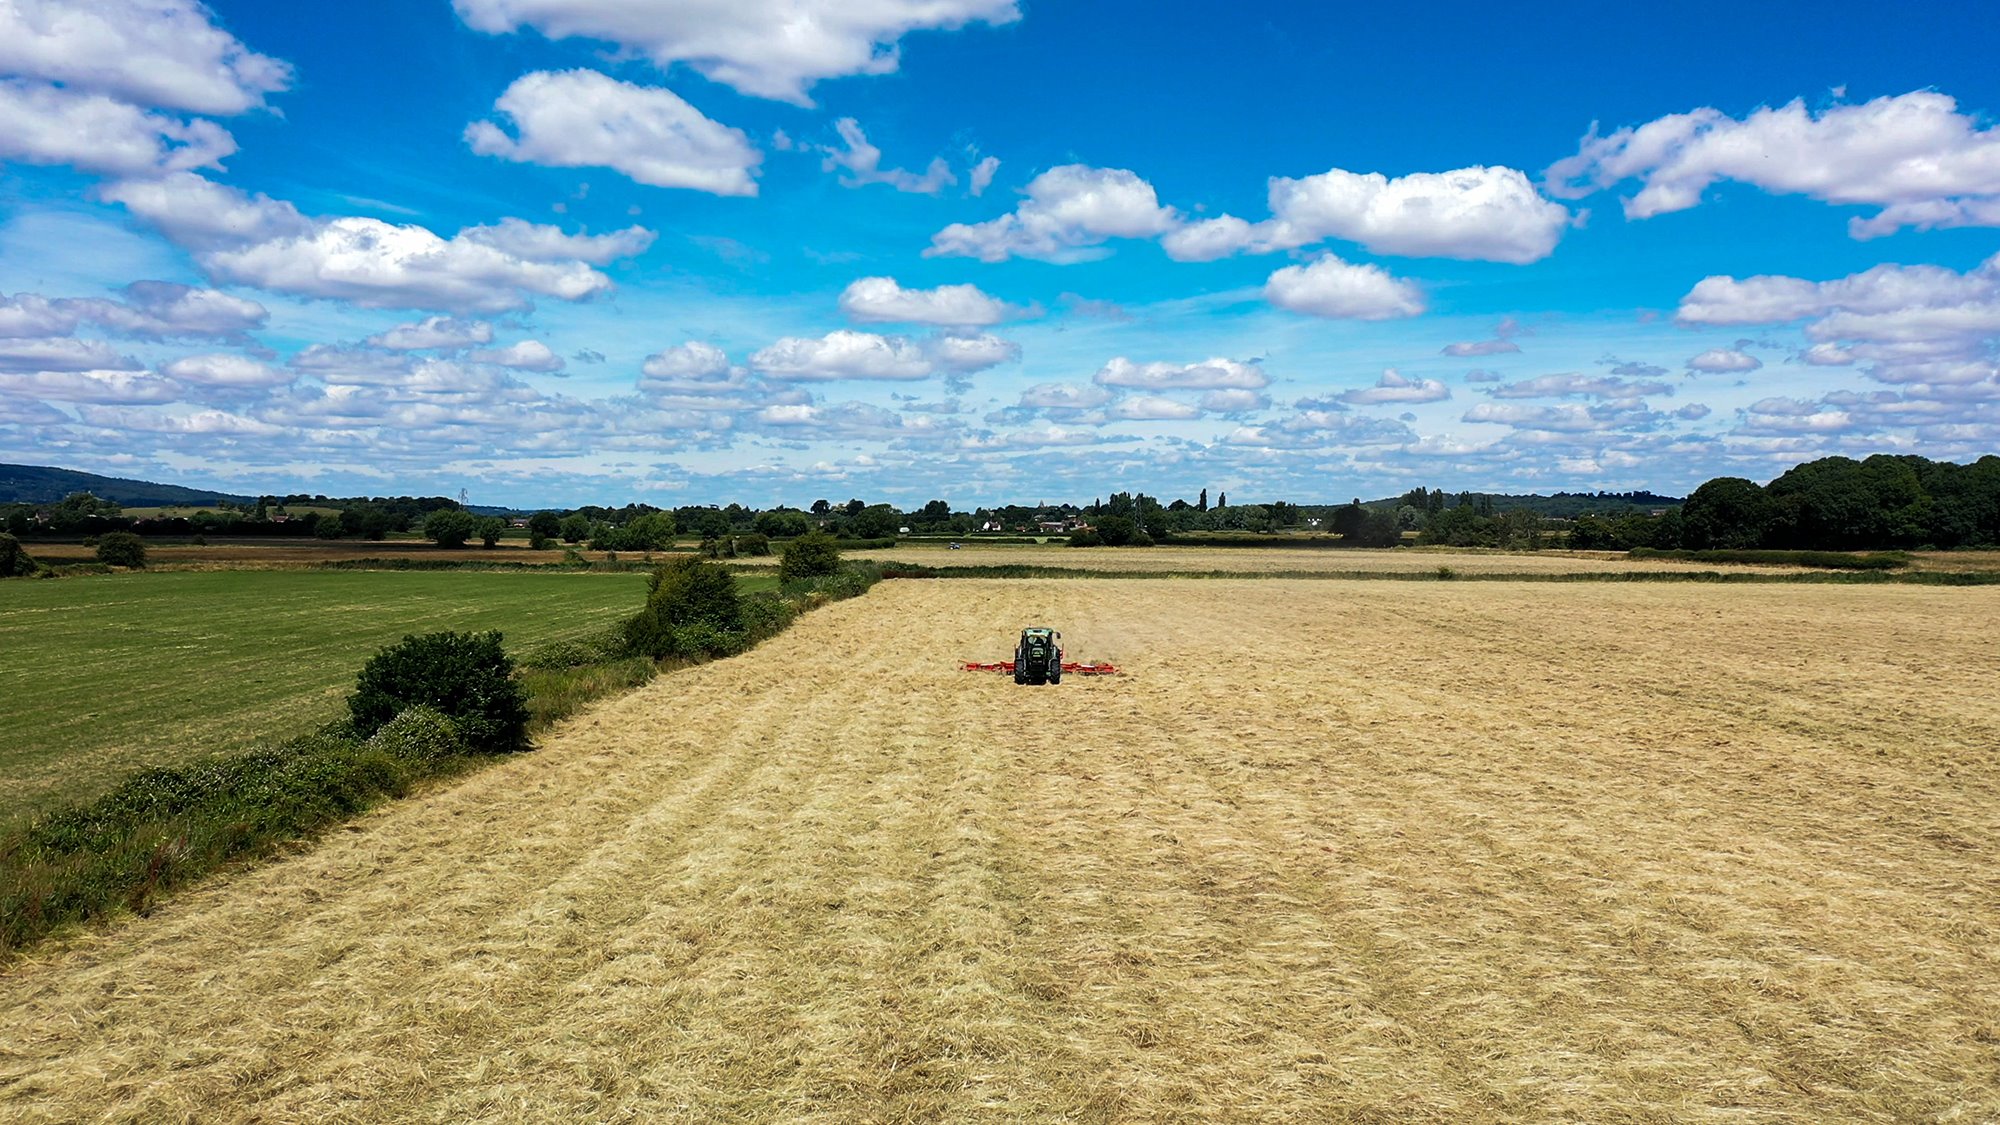 A tractor mowing a field on a beautifully sunny day with a bright blue sky and wispy clouds